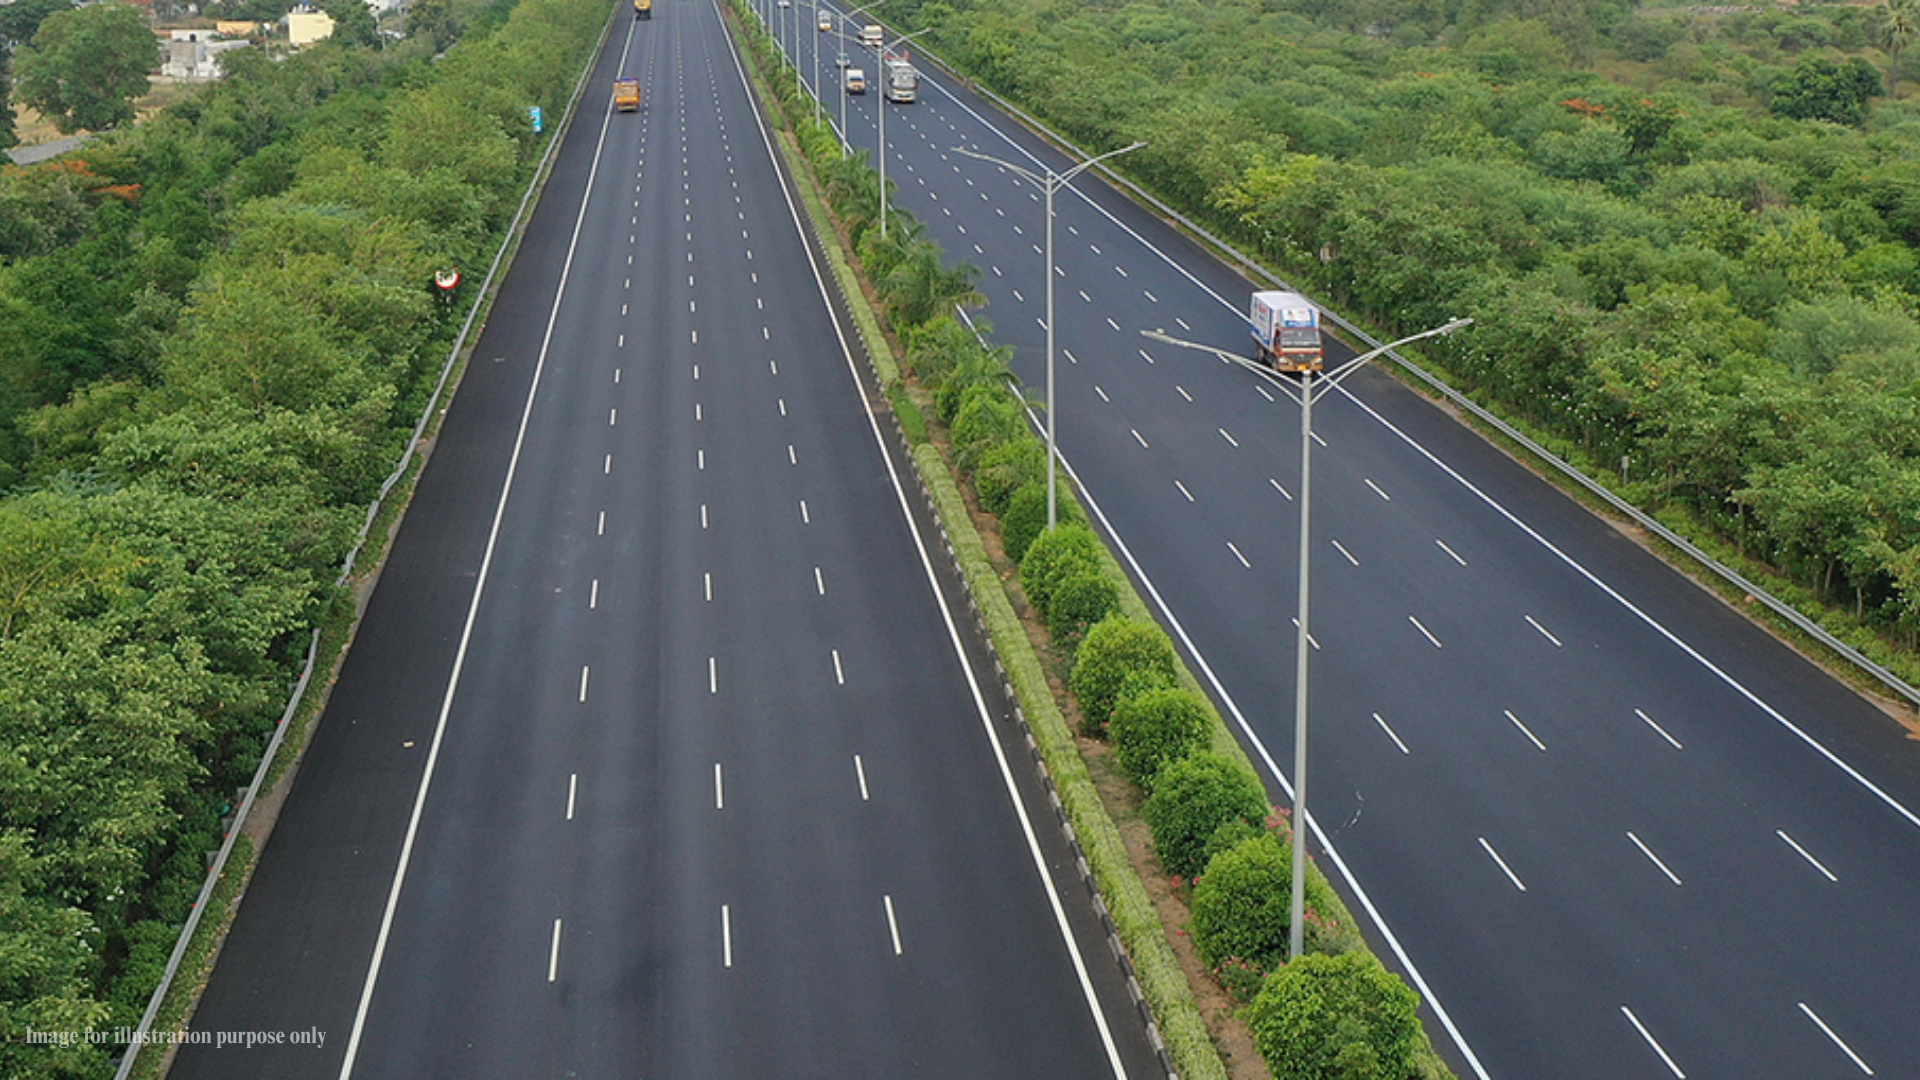 Kanpur: Work On 93 Km Outer Ring Road Project To Start Soon, Tenders  Finalised For Two Packages